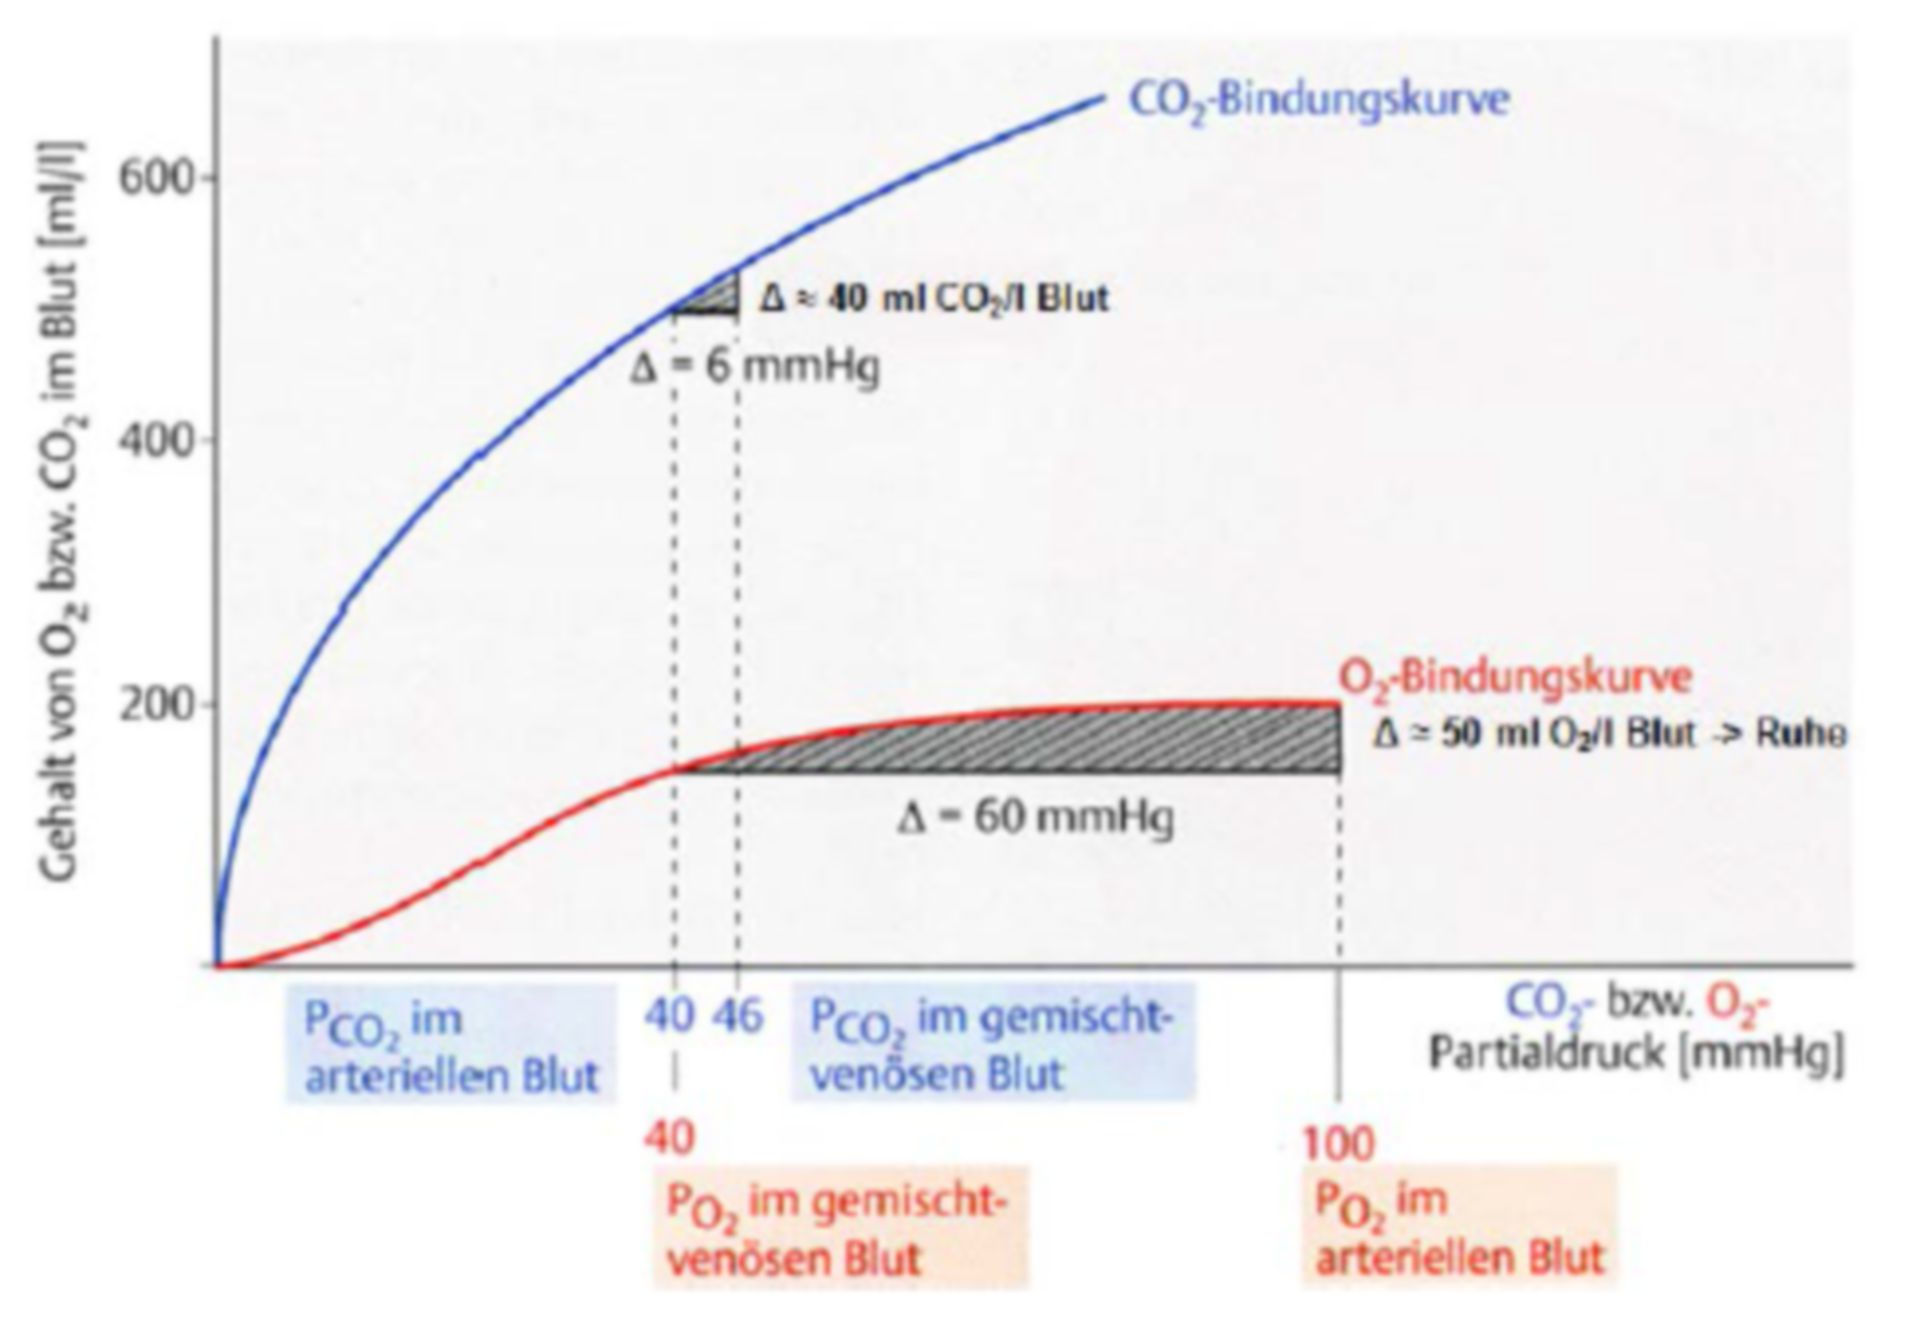 Course of O2- versus CO2-binding curve in Physiological Levels